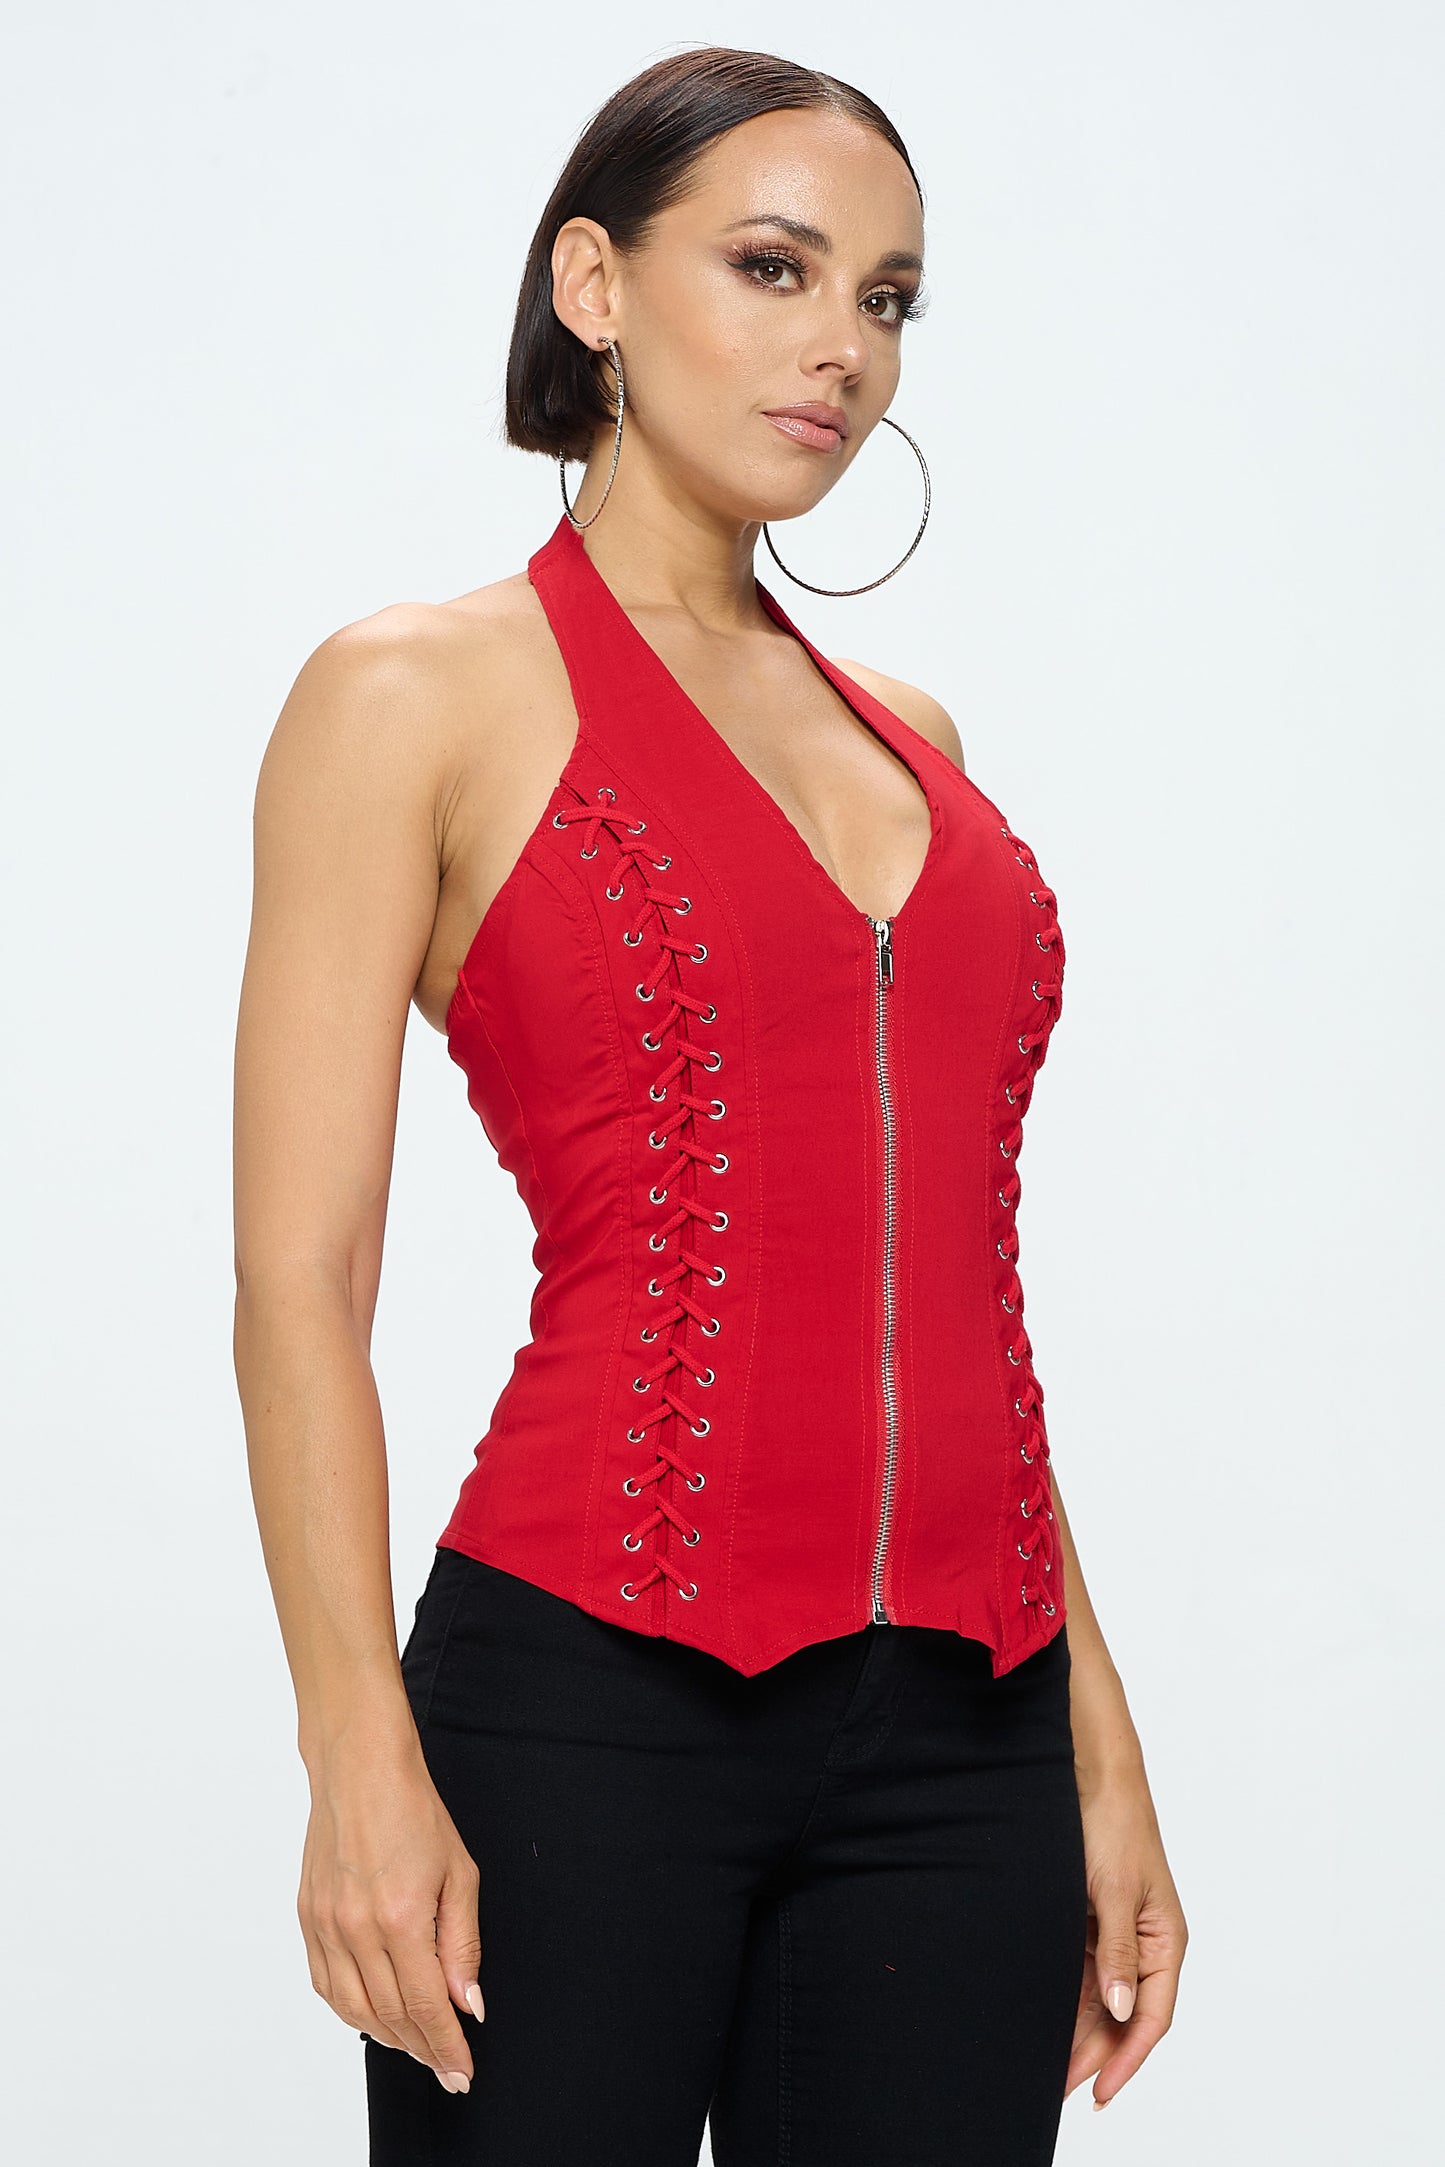 LACE UP DETAIL ZIP FRONT SLEEVELESS HALTER NECK TANK TOP